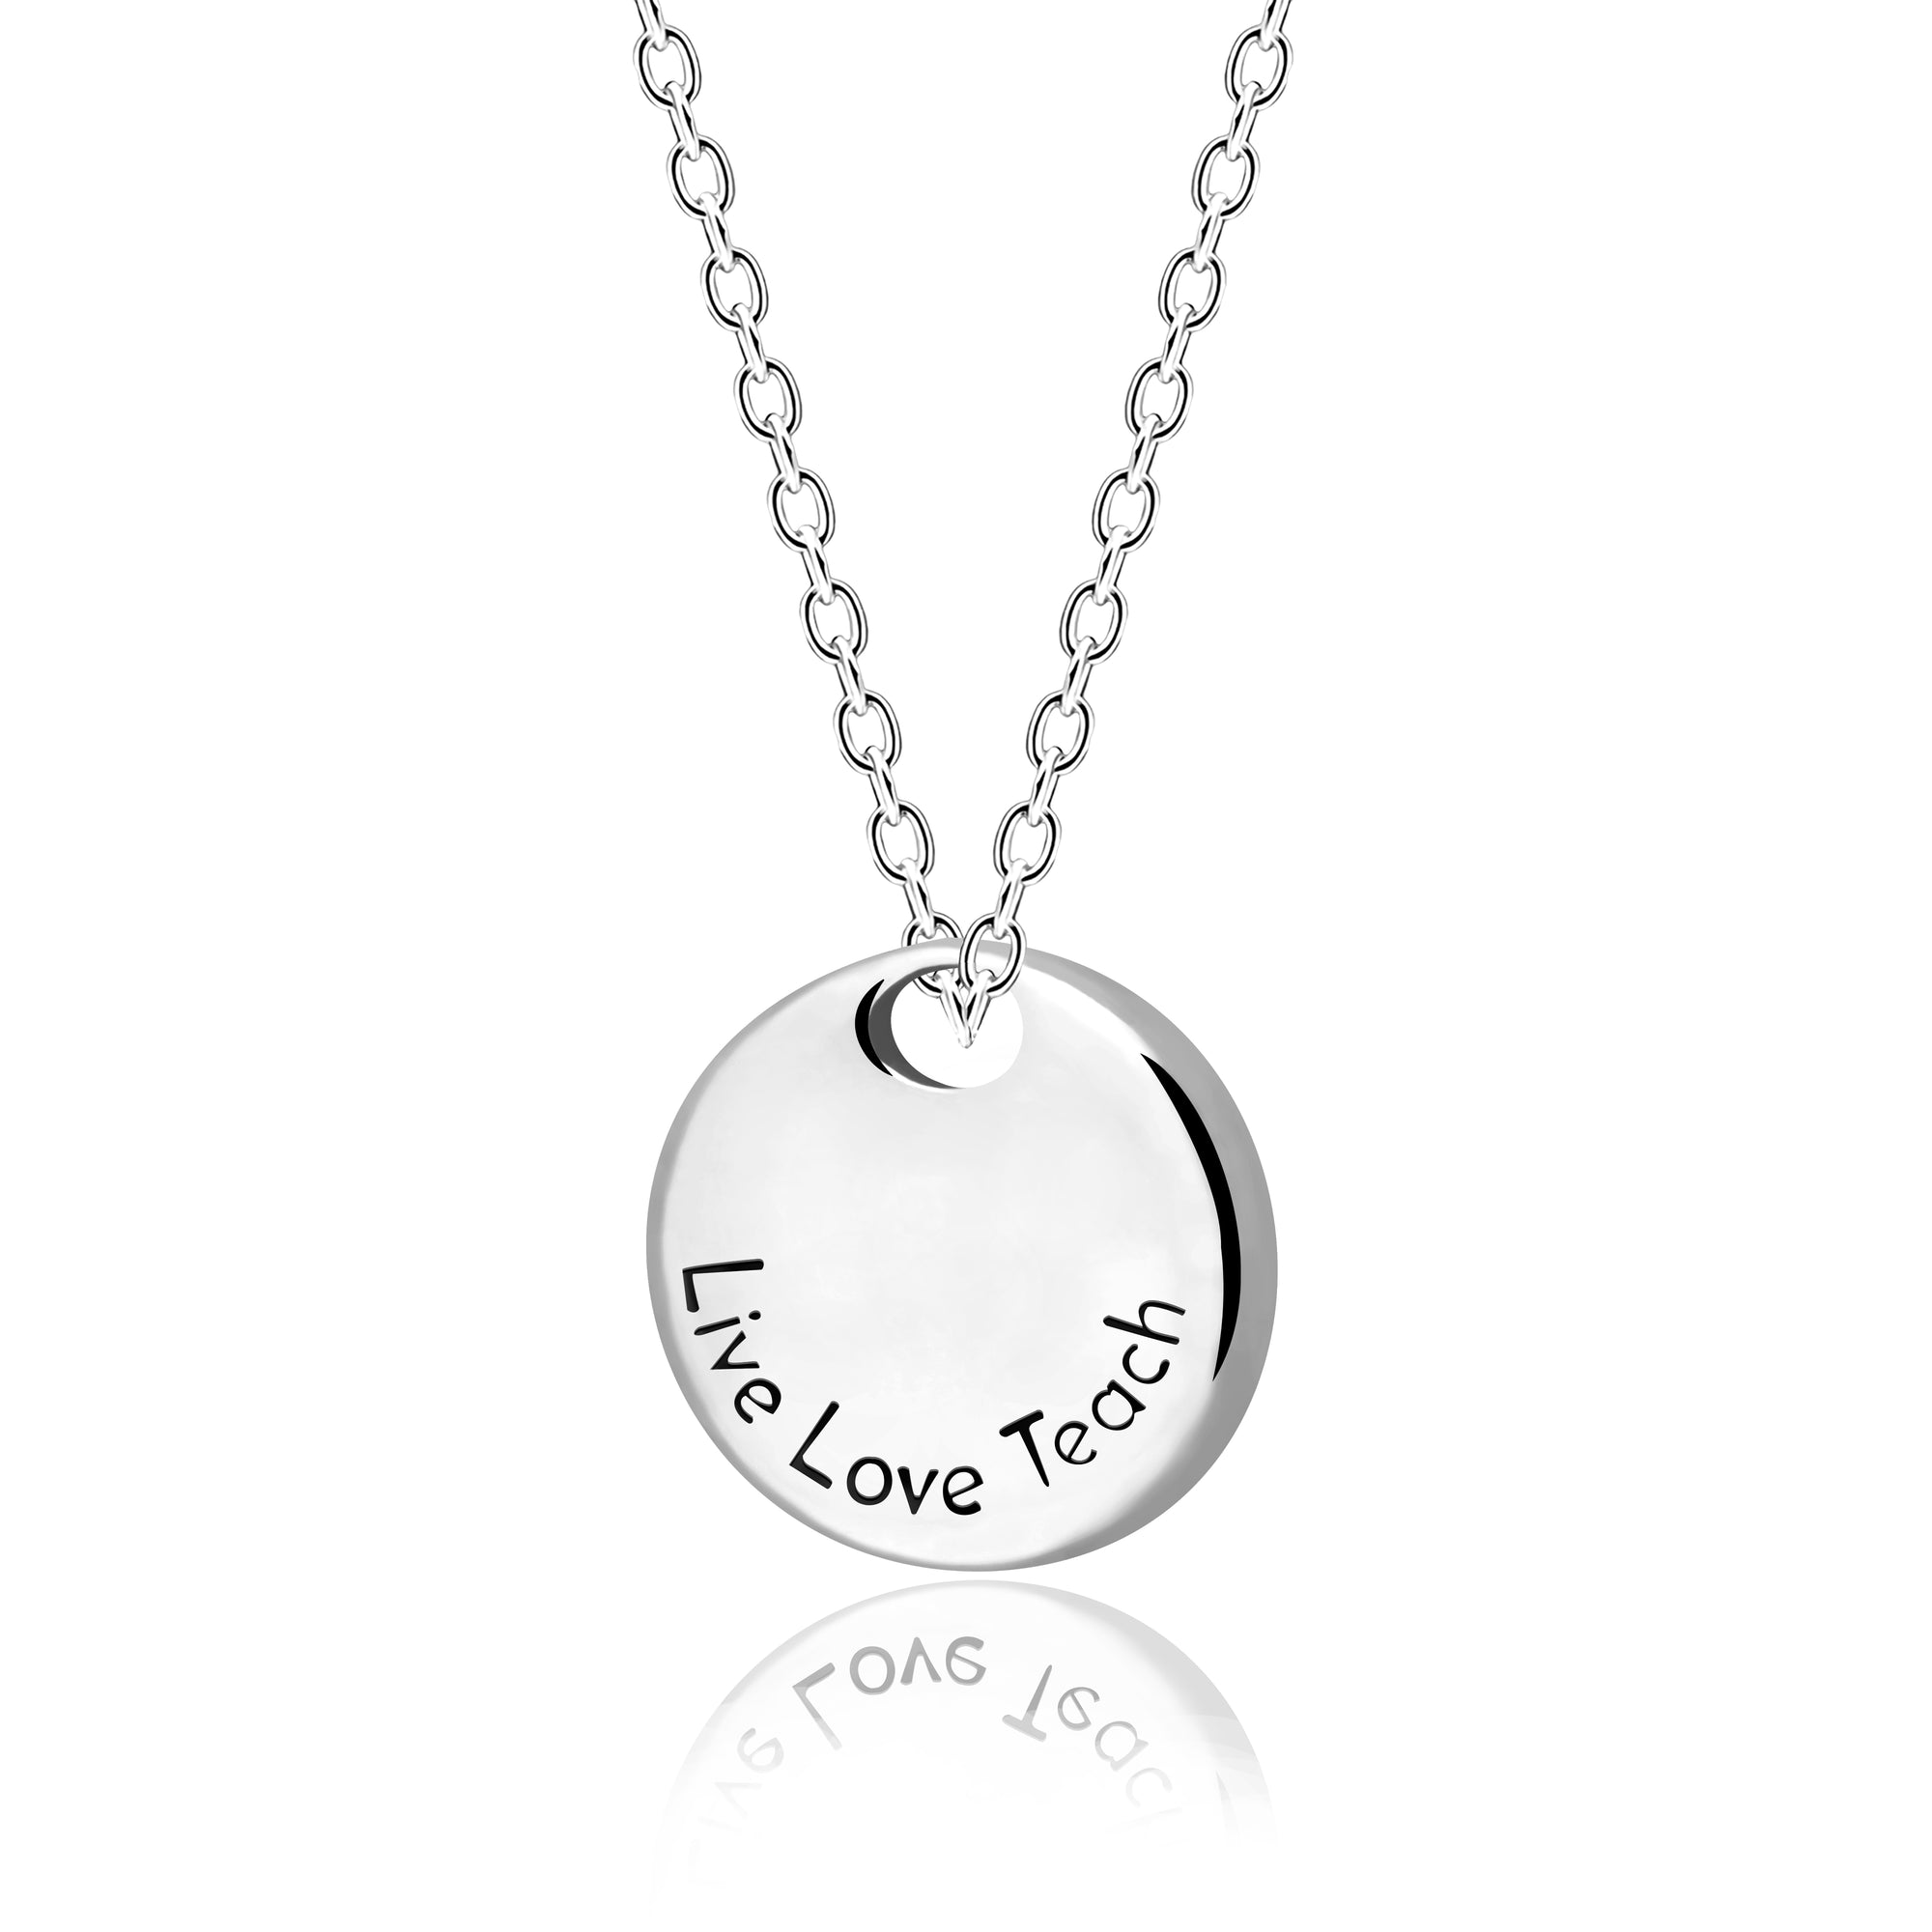 Jane Live Love Teach Round Plate Pendant Necklace, Thank you Appreciation Gift for Teacher, Mentors, With Inspirational Message Card